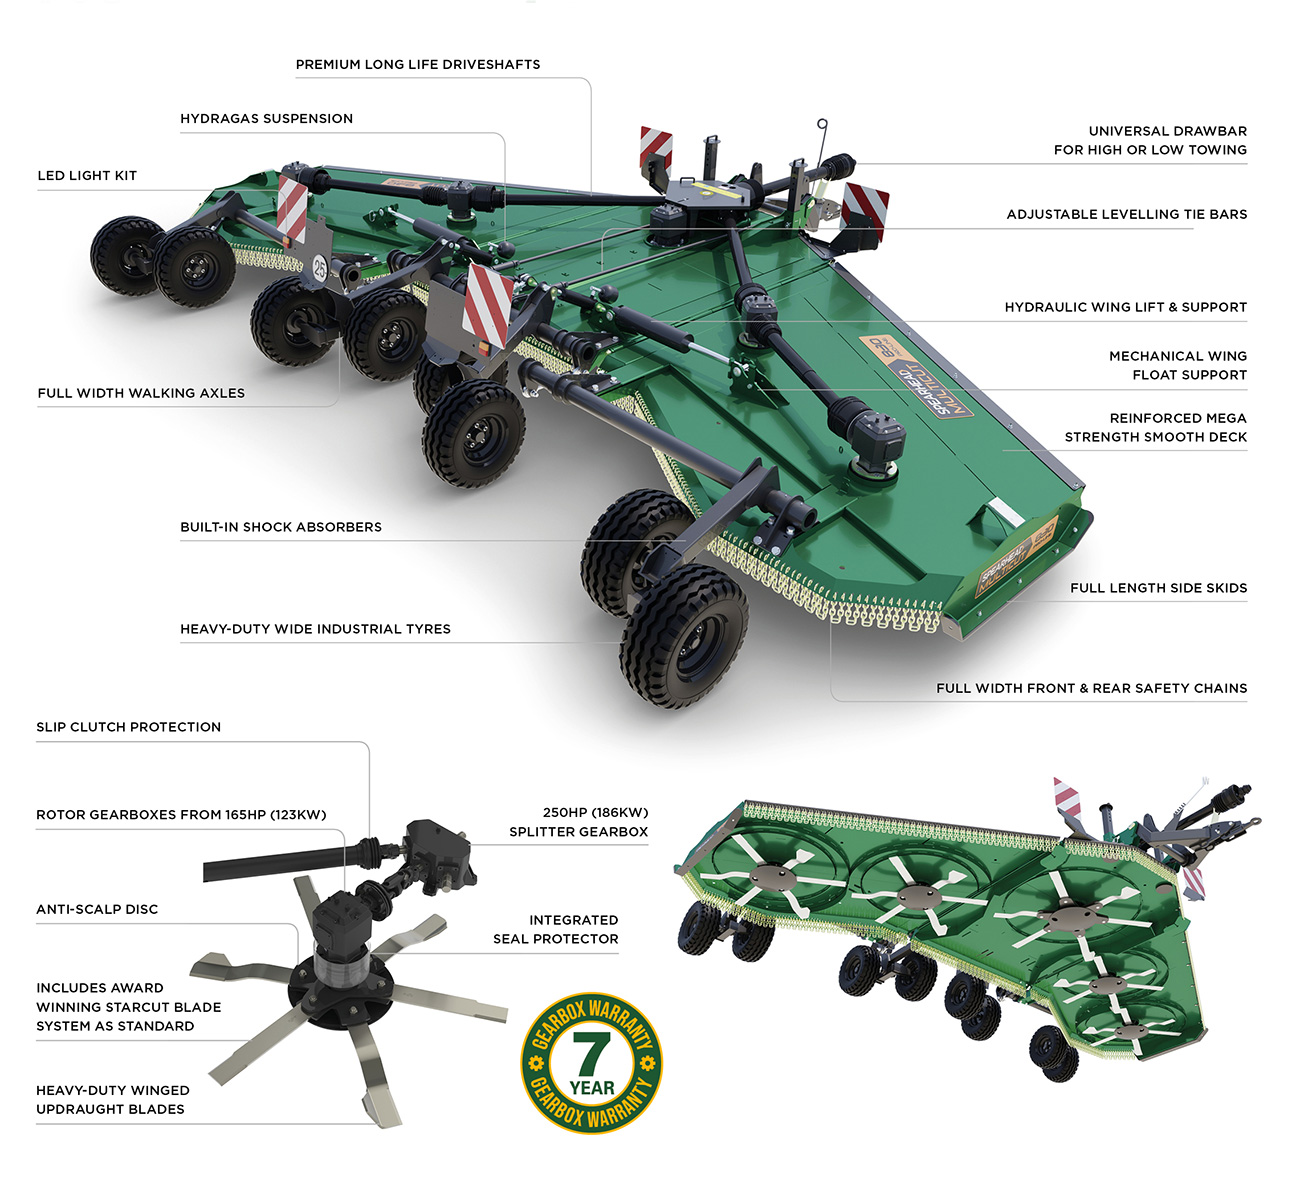 Multicut 830 Proline Rotary Mower features